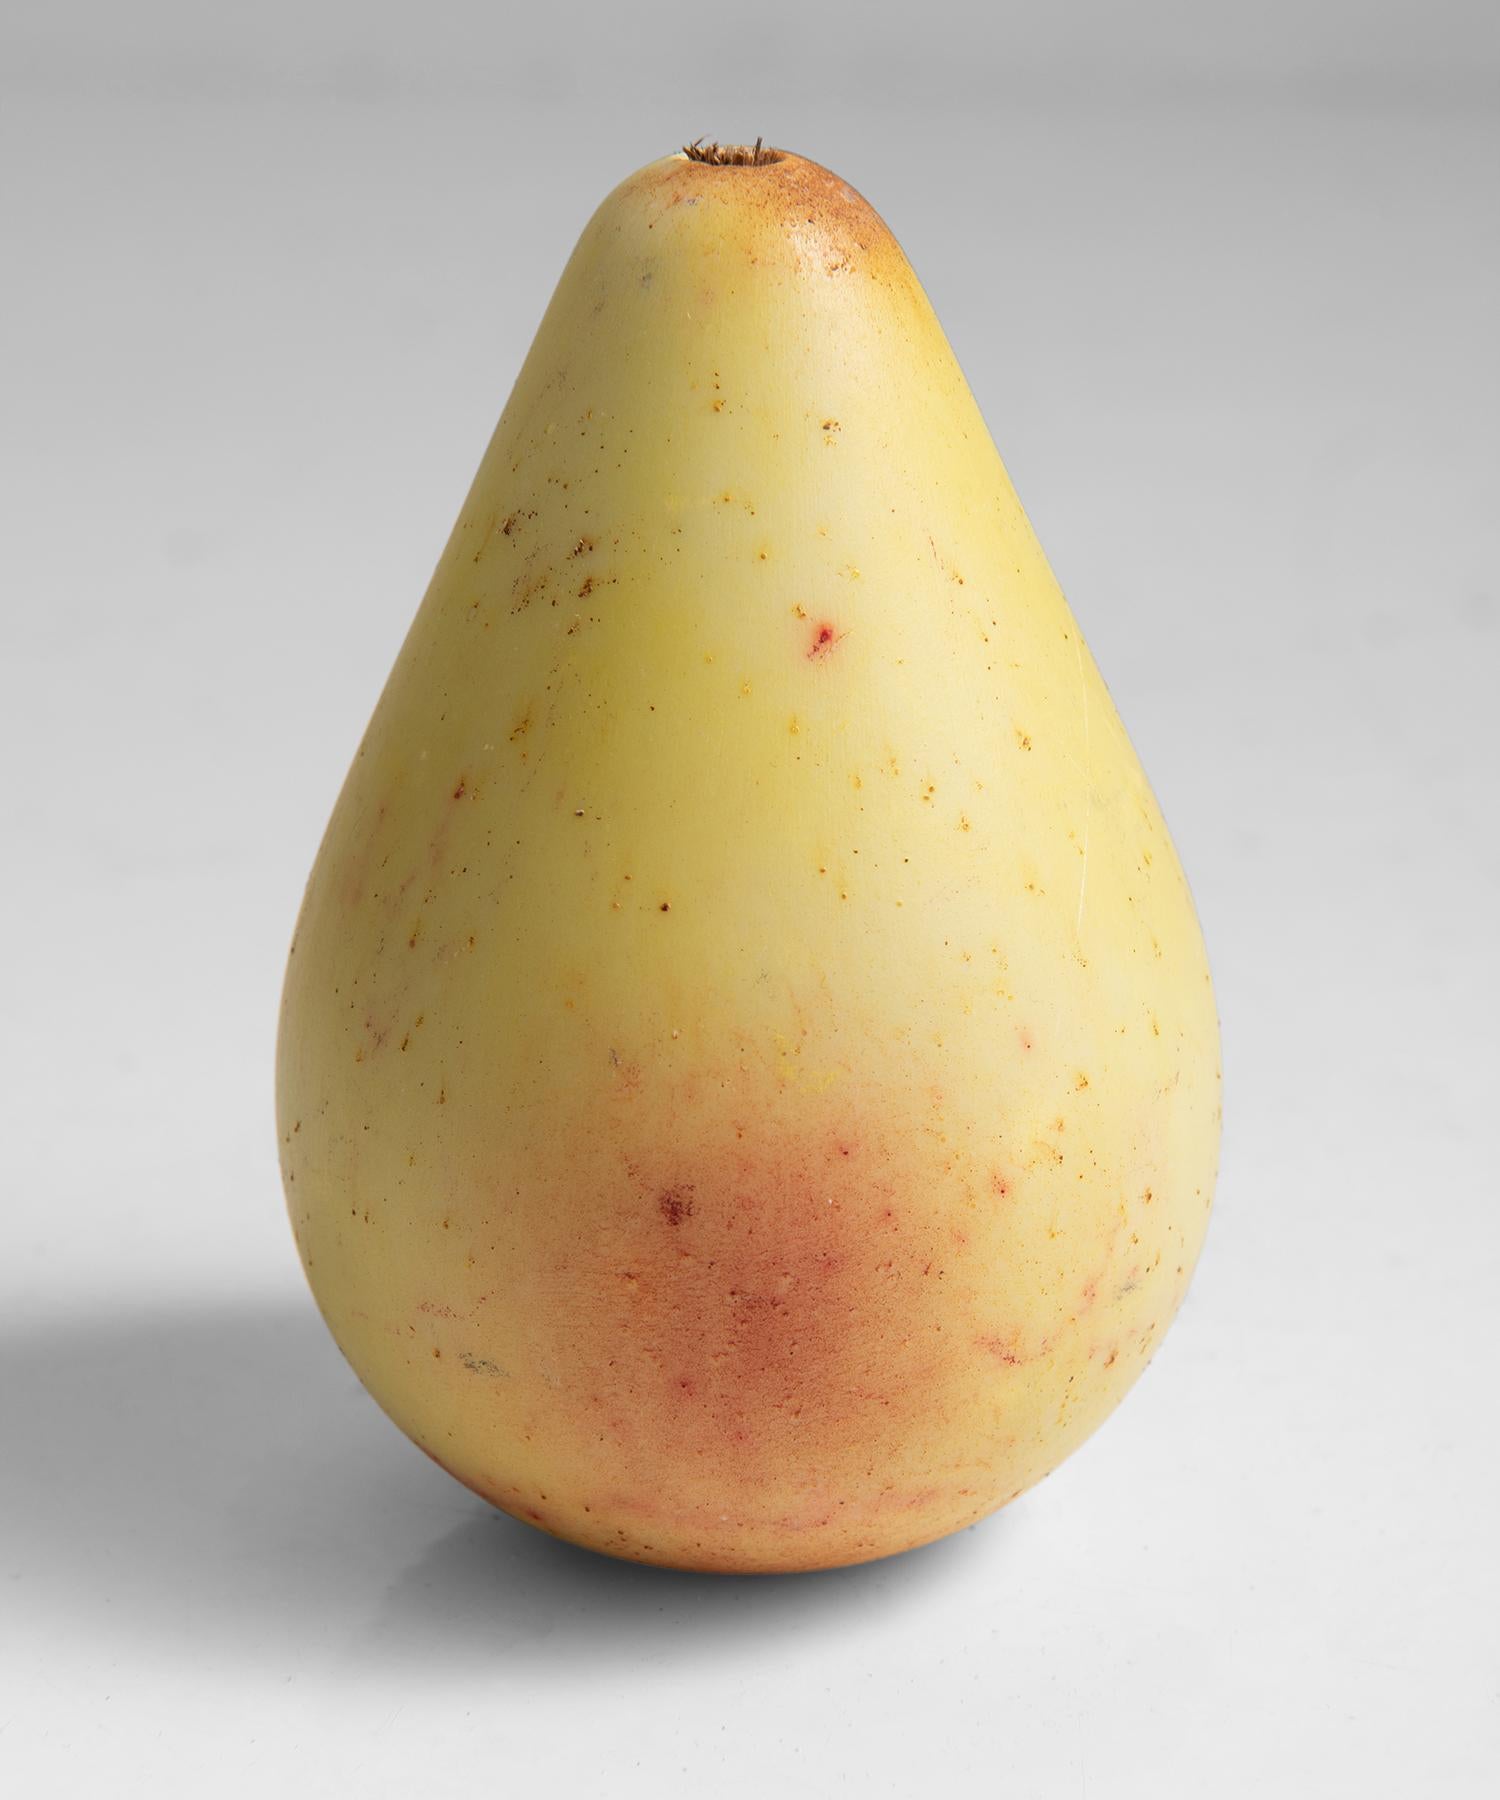 Hand Painted Stone Pear, America circa 1960.

For display only, not edible. Skillfully painted.